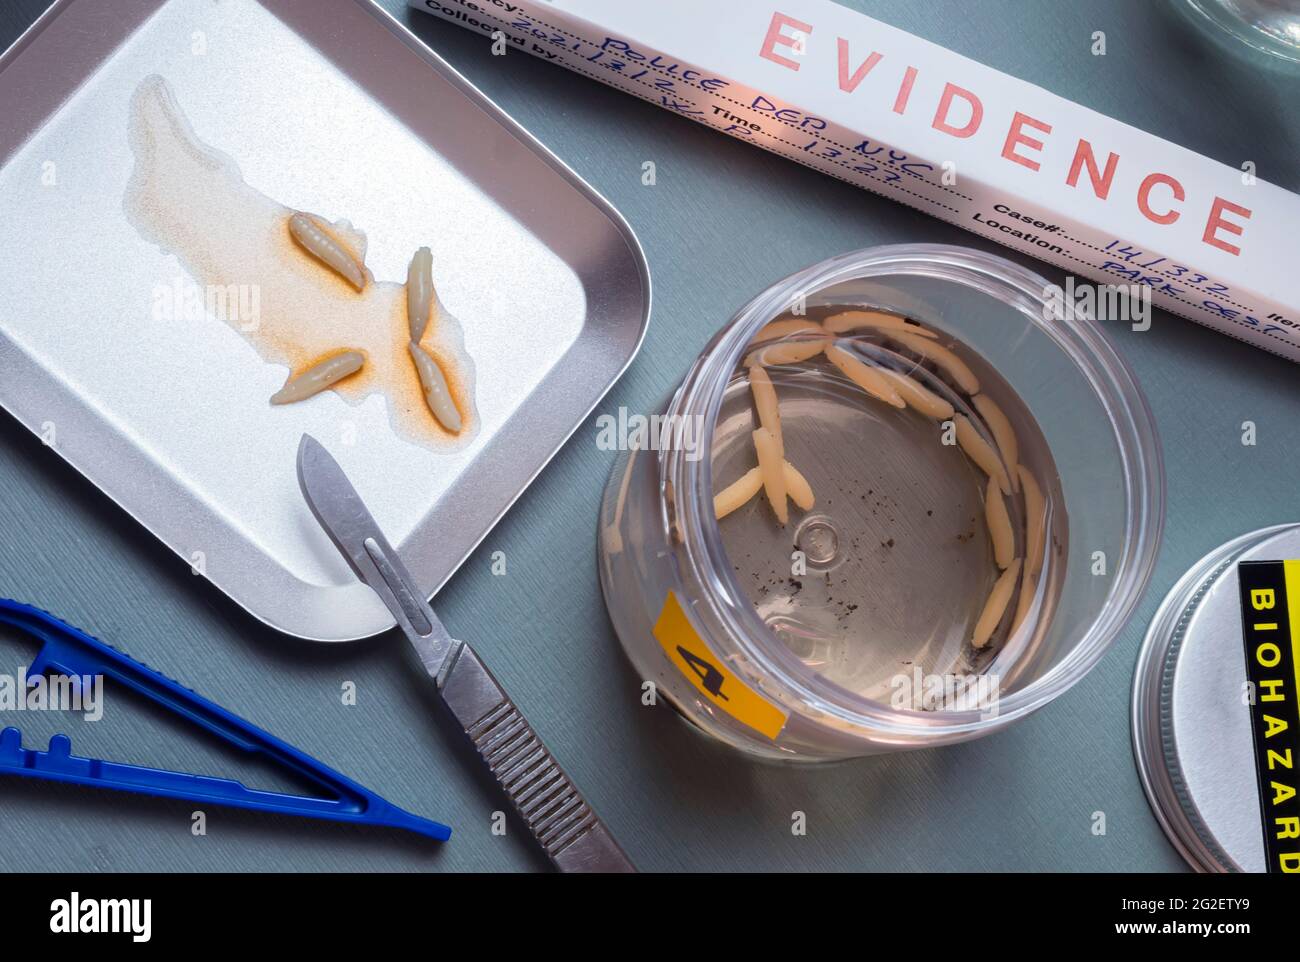 Analysis of larvae from corpse involved in murder in crime lab, conceptual image Stock Photo